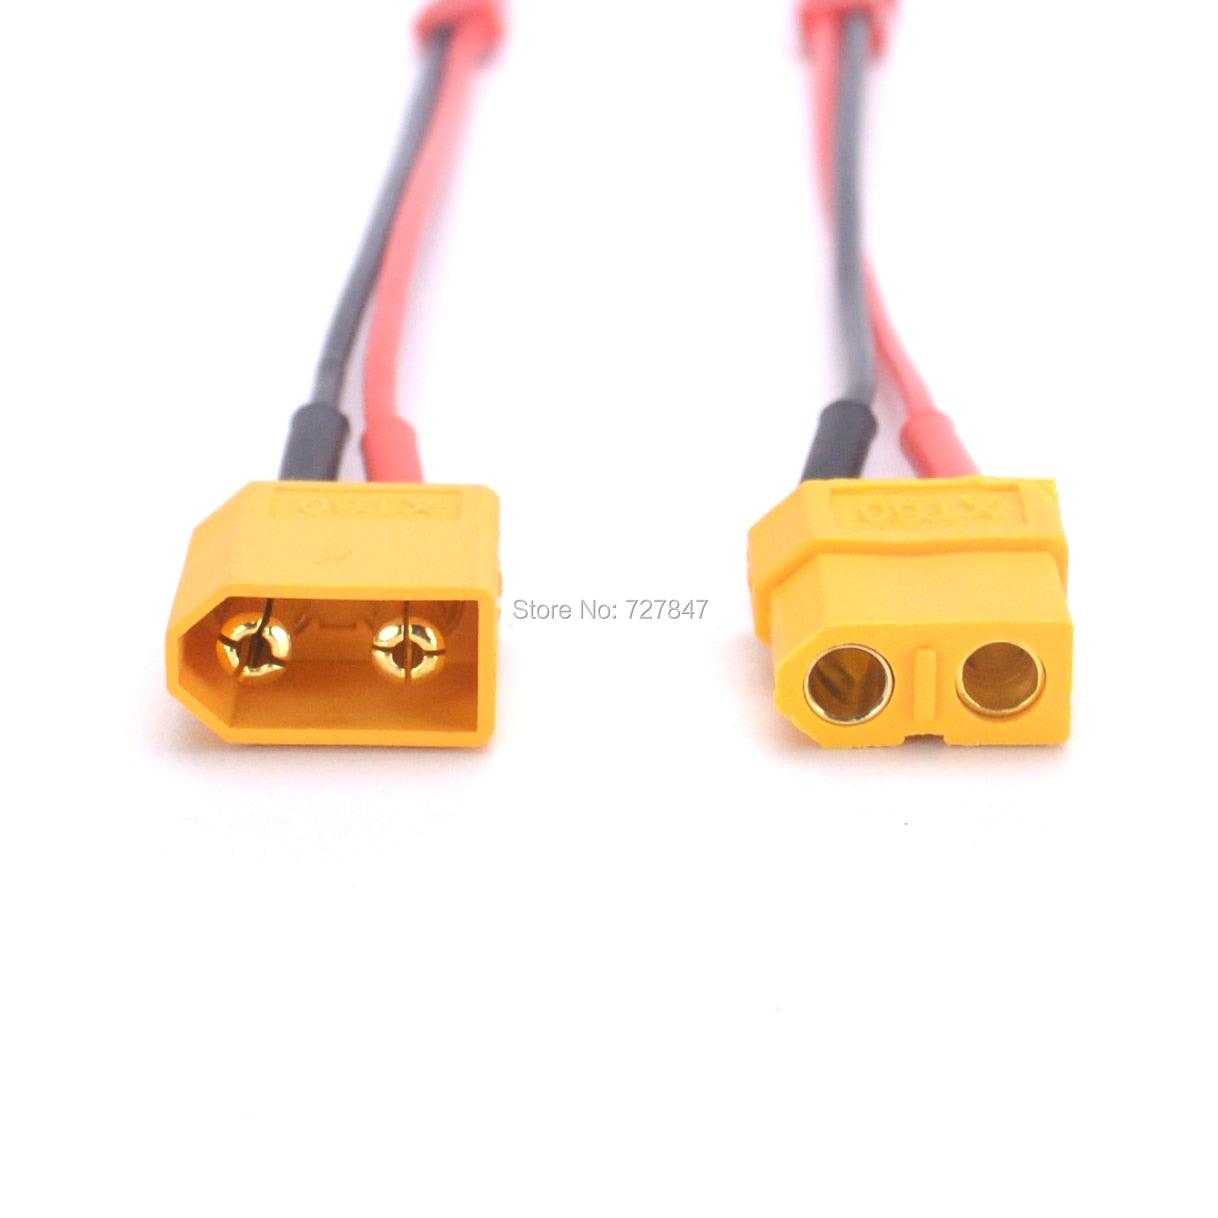 FPV Drone Charger Adapter - XT60 Male / Female Connector to JST plug charger adapter LiPo Battery Model Charging Adapter Converter Lead 22AWG - RCDrone